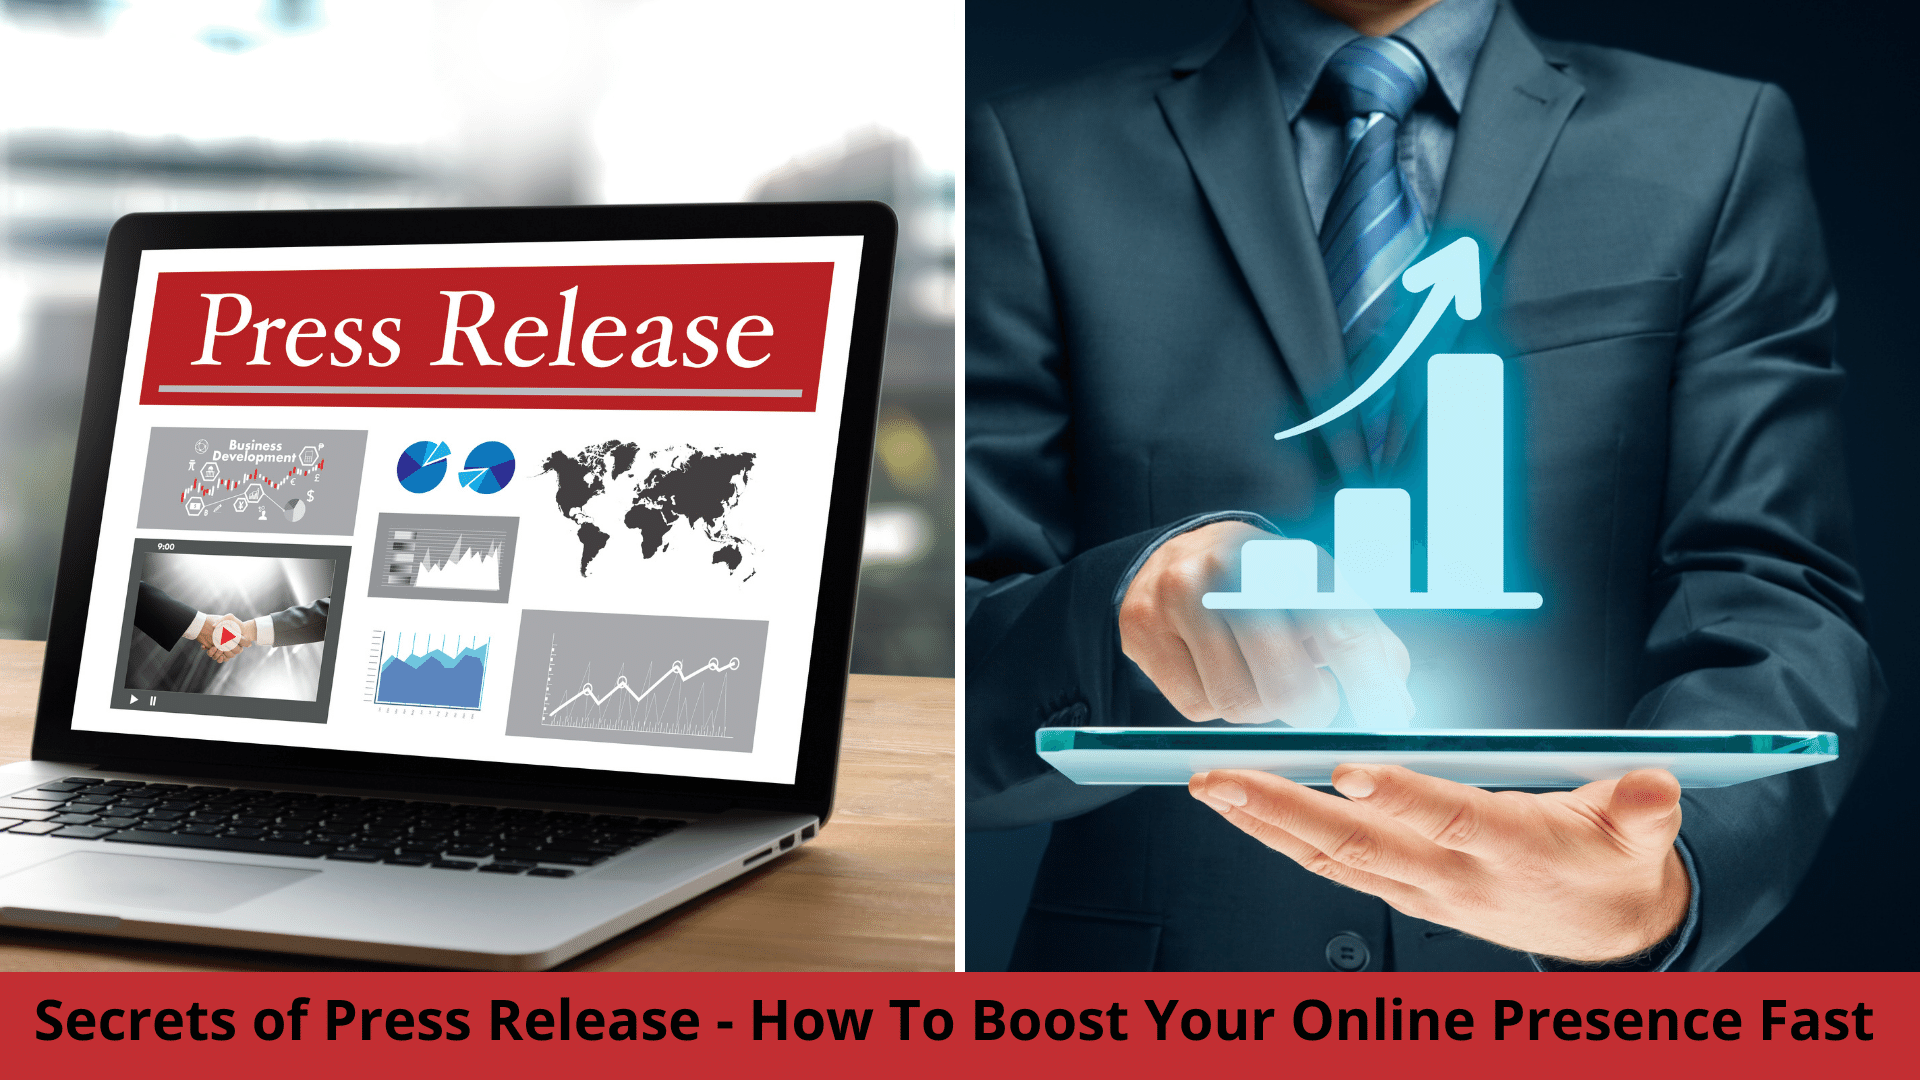 Secrets Of Press Release - How To Boost Your Online Presence Fast